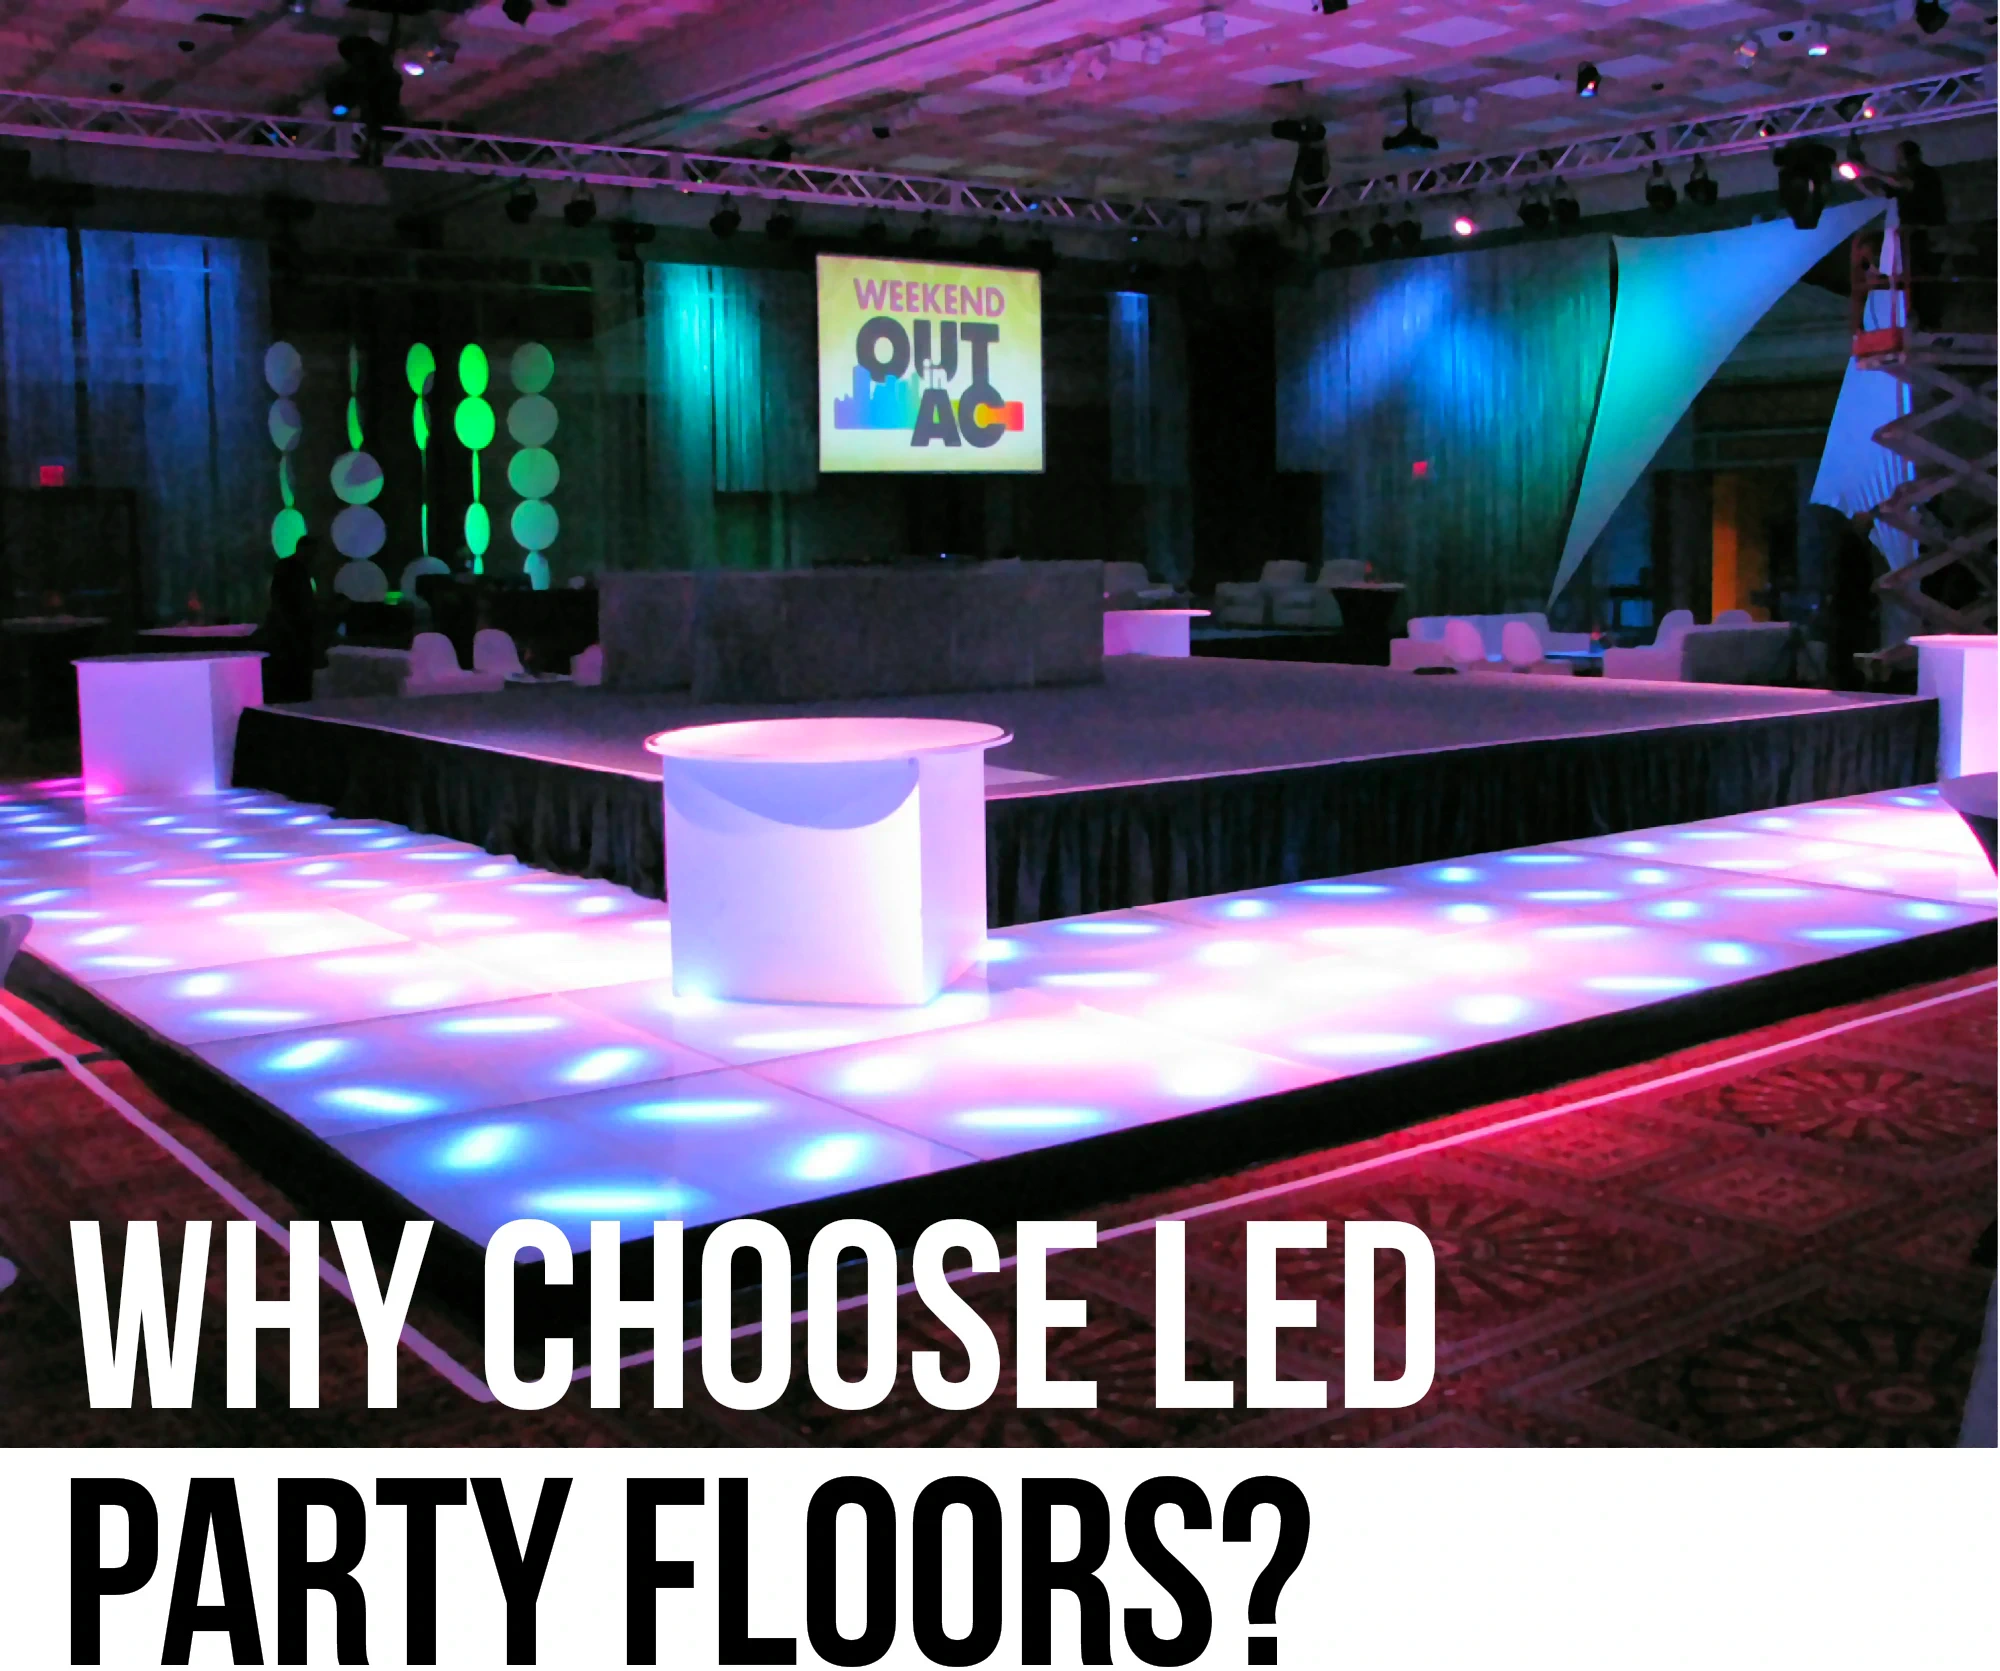 Rental dance floor surrounding a stage on three sides.